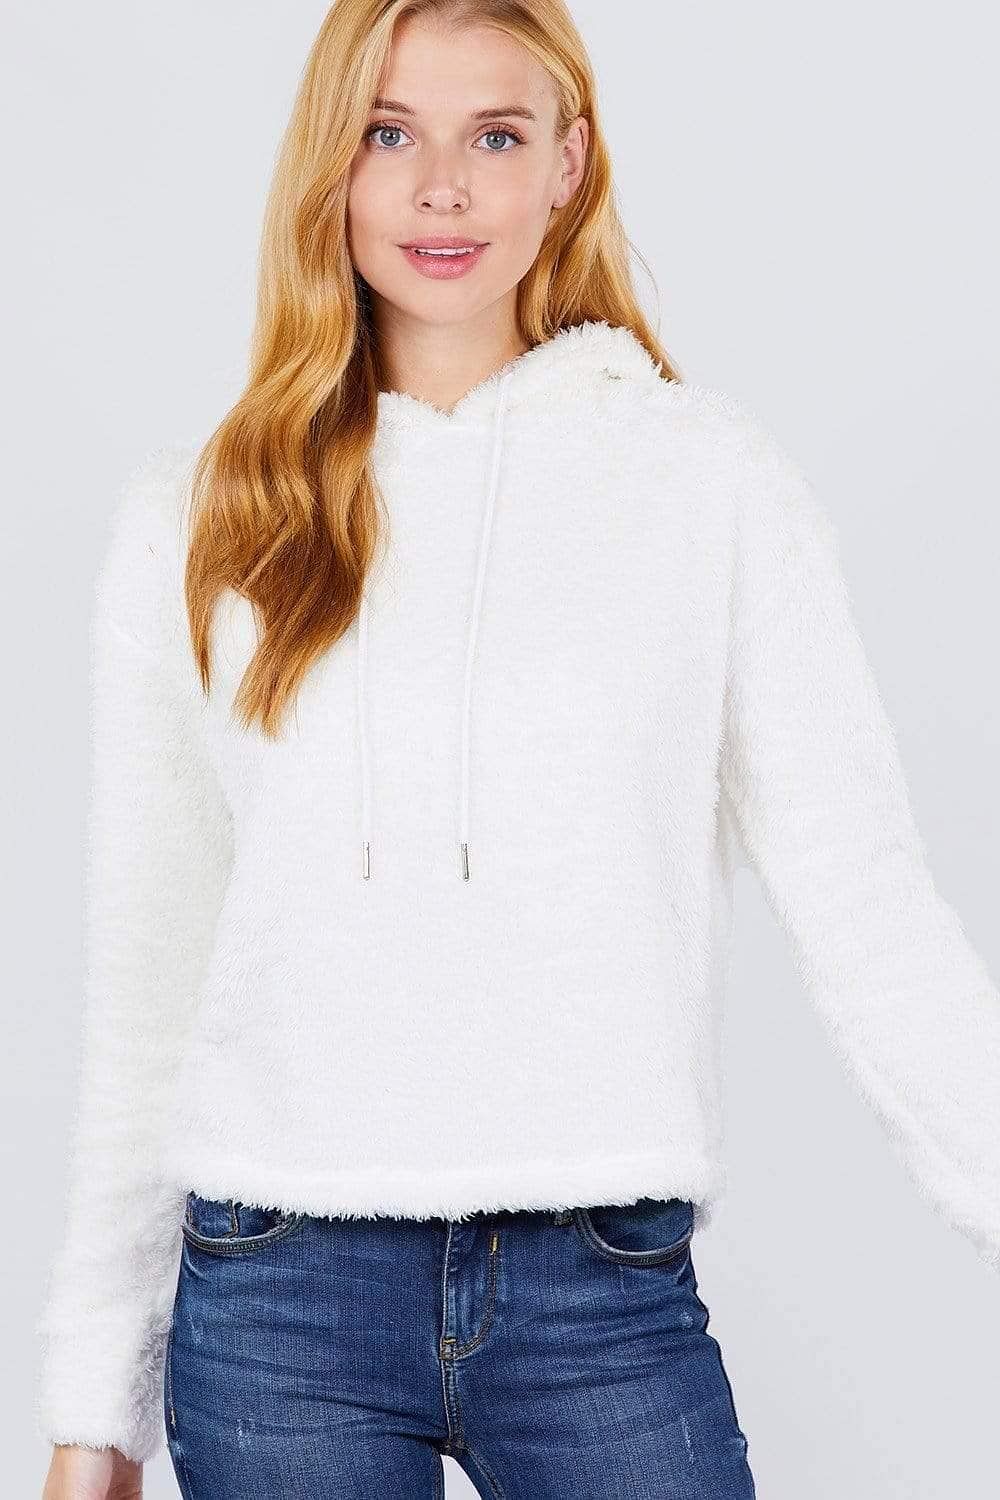 Ivory Long Sleeve Faux Fur Sweater - Shopping Therapy S Top